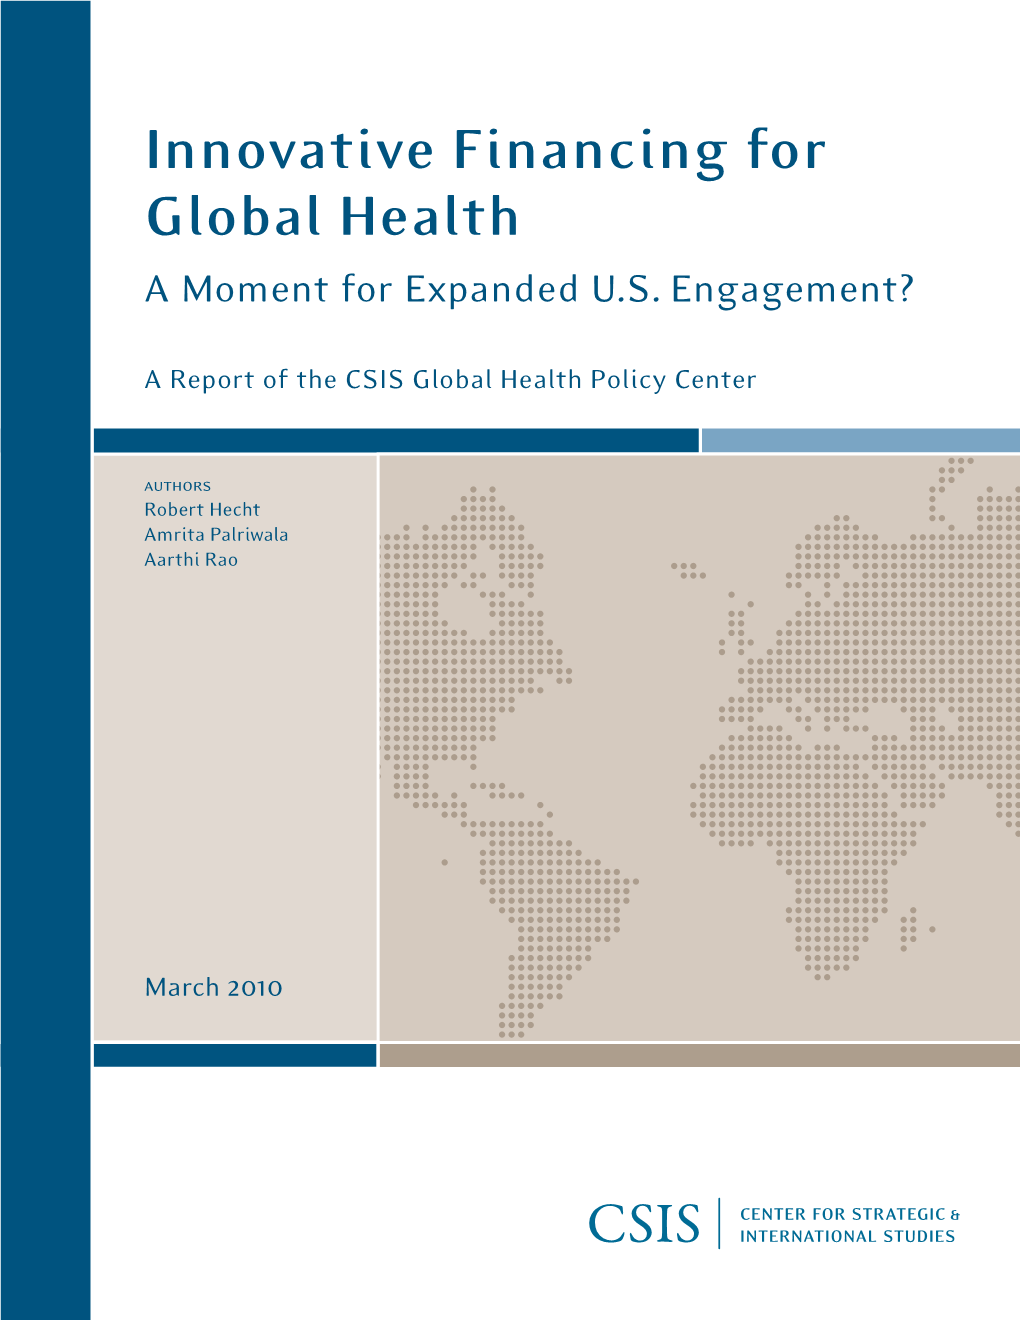 Innovative Financing for Global Health a Moment for Expanded U.S